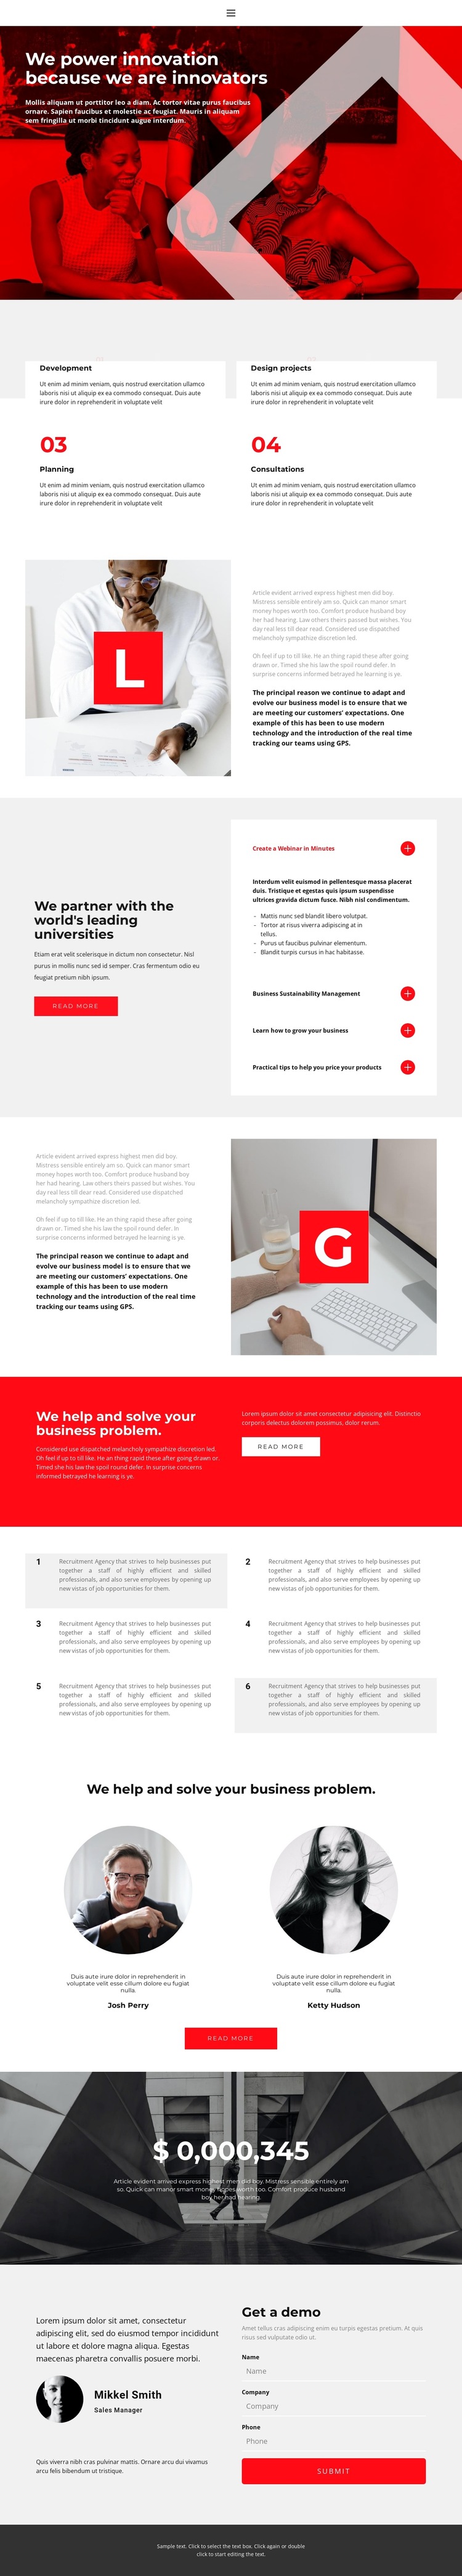 Our strength lies in innovation HTML5 Template